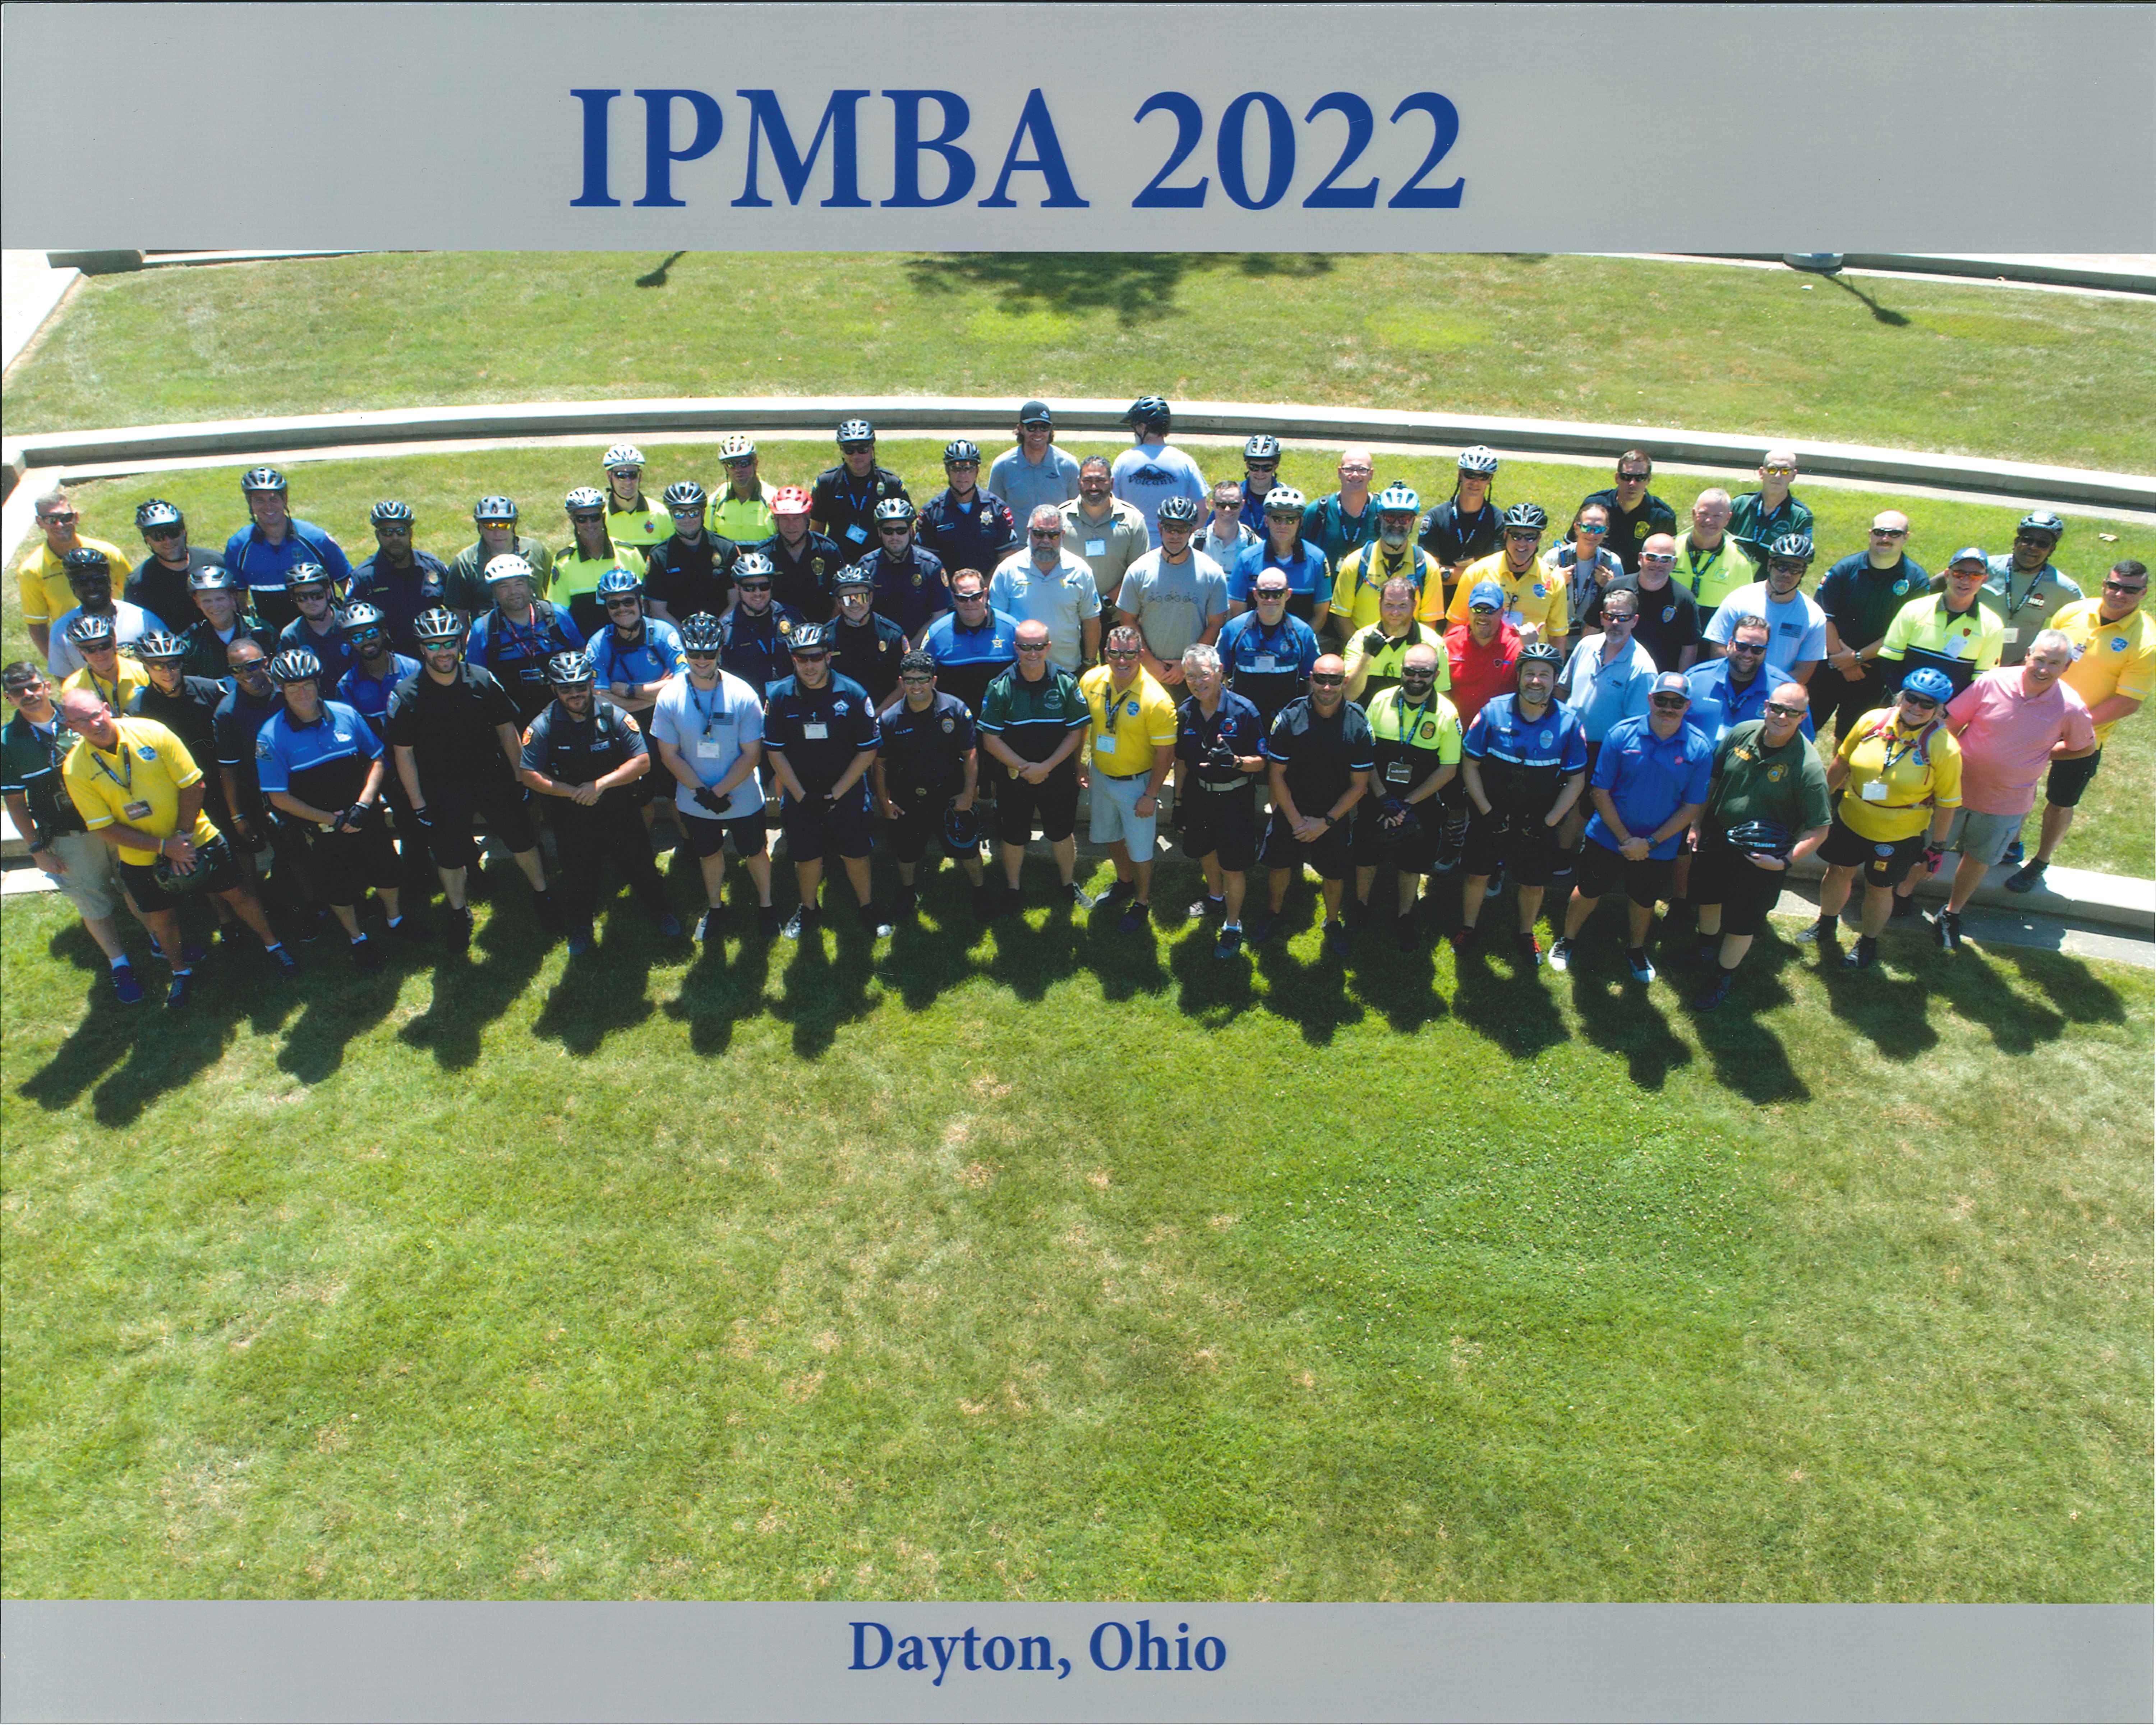 IPMBA News Vol. 31 #2 2022 Conference Highlights